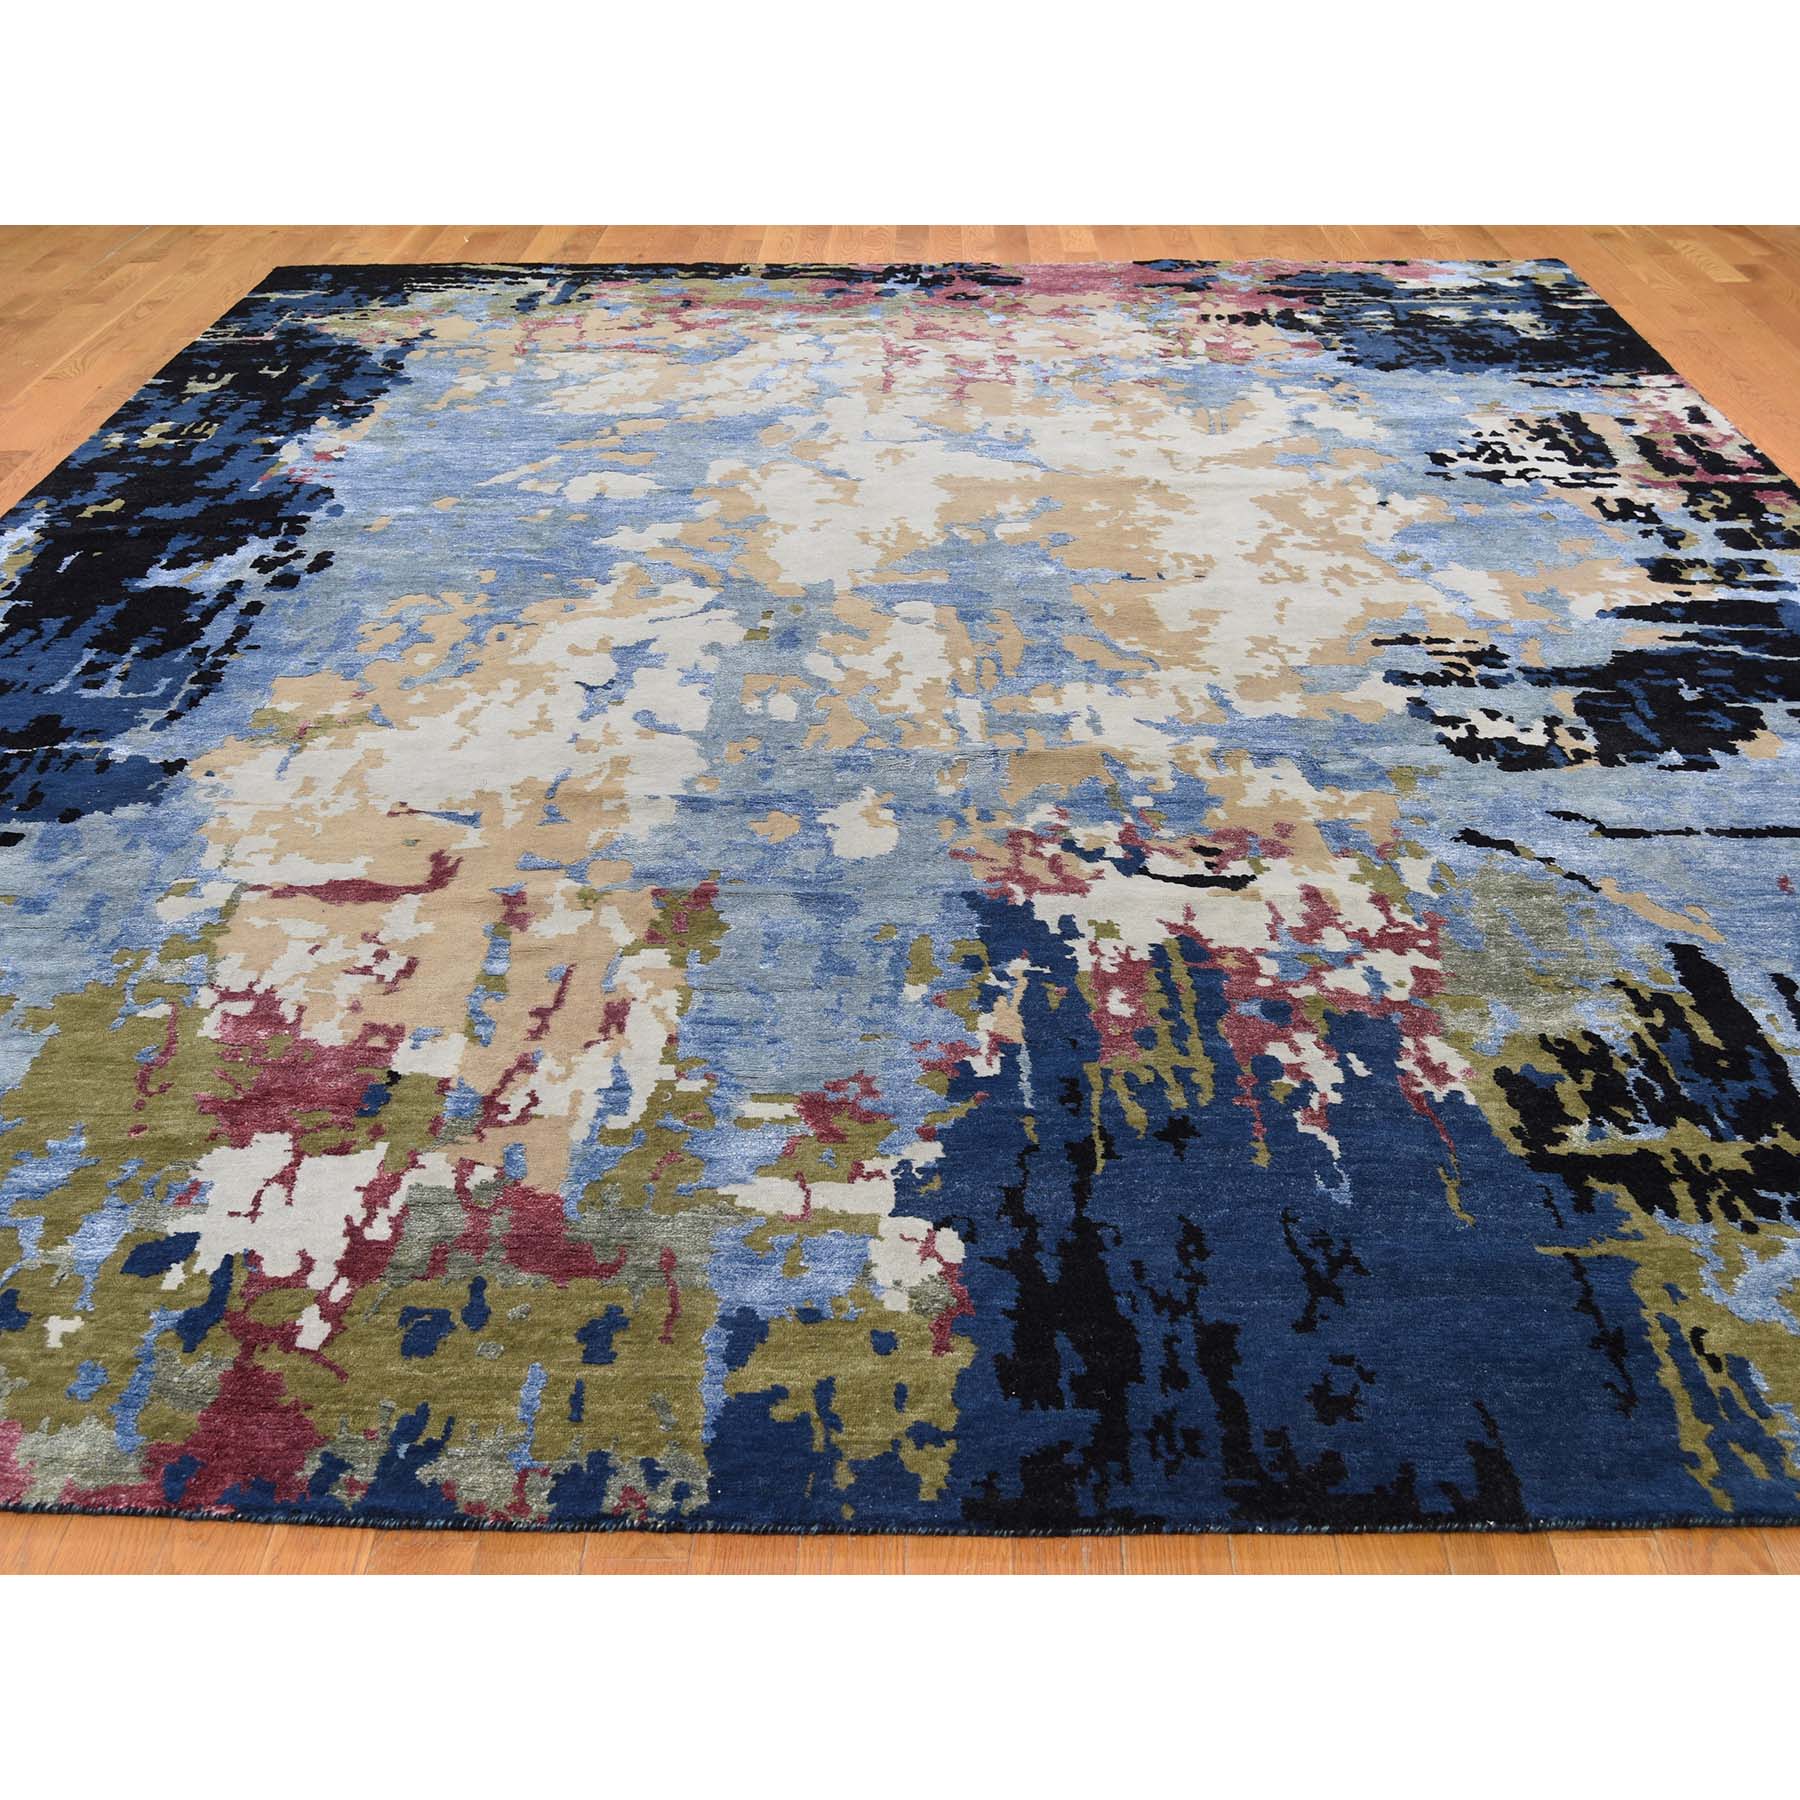 10-1 x13- Hi-Low Pile Abstract Design Wool And Silk Hand-Knotted Oriental Rug 